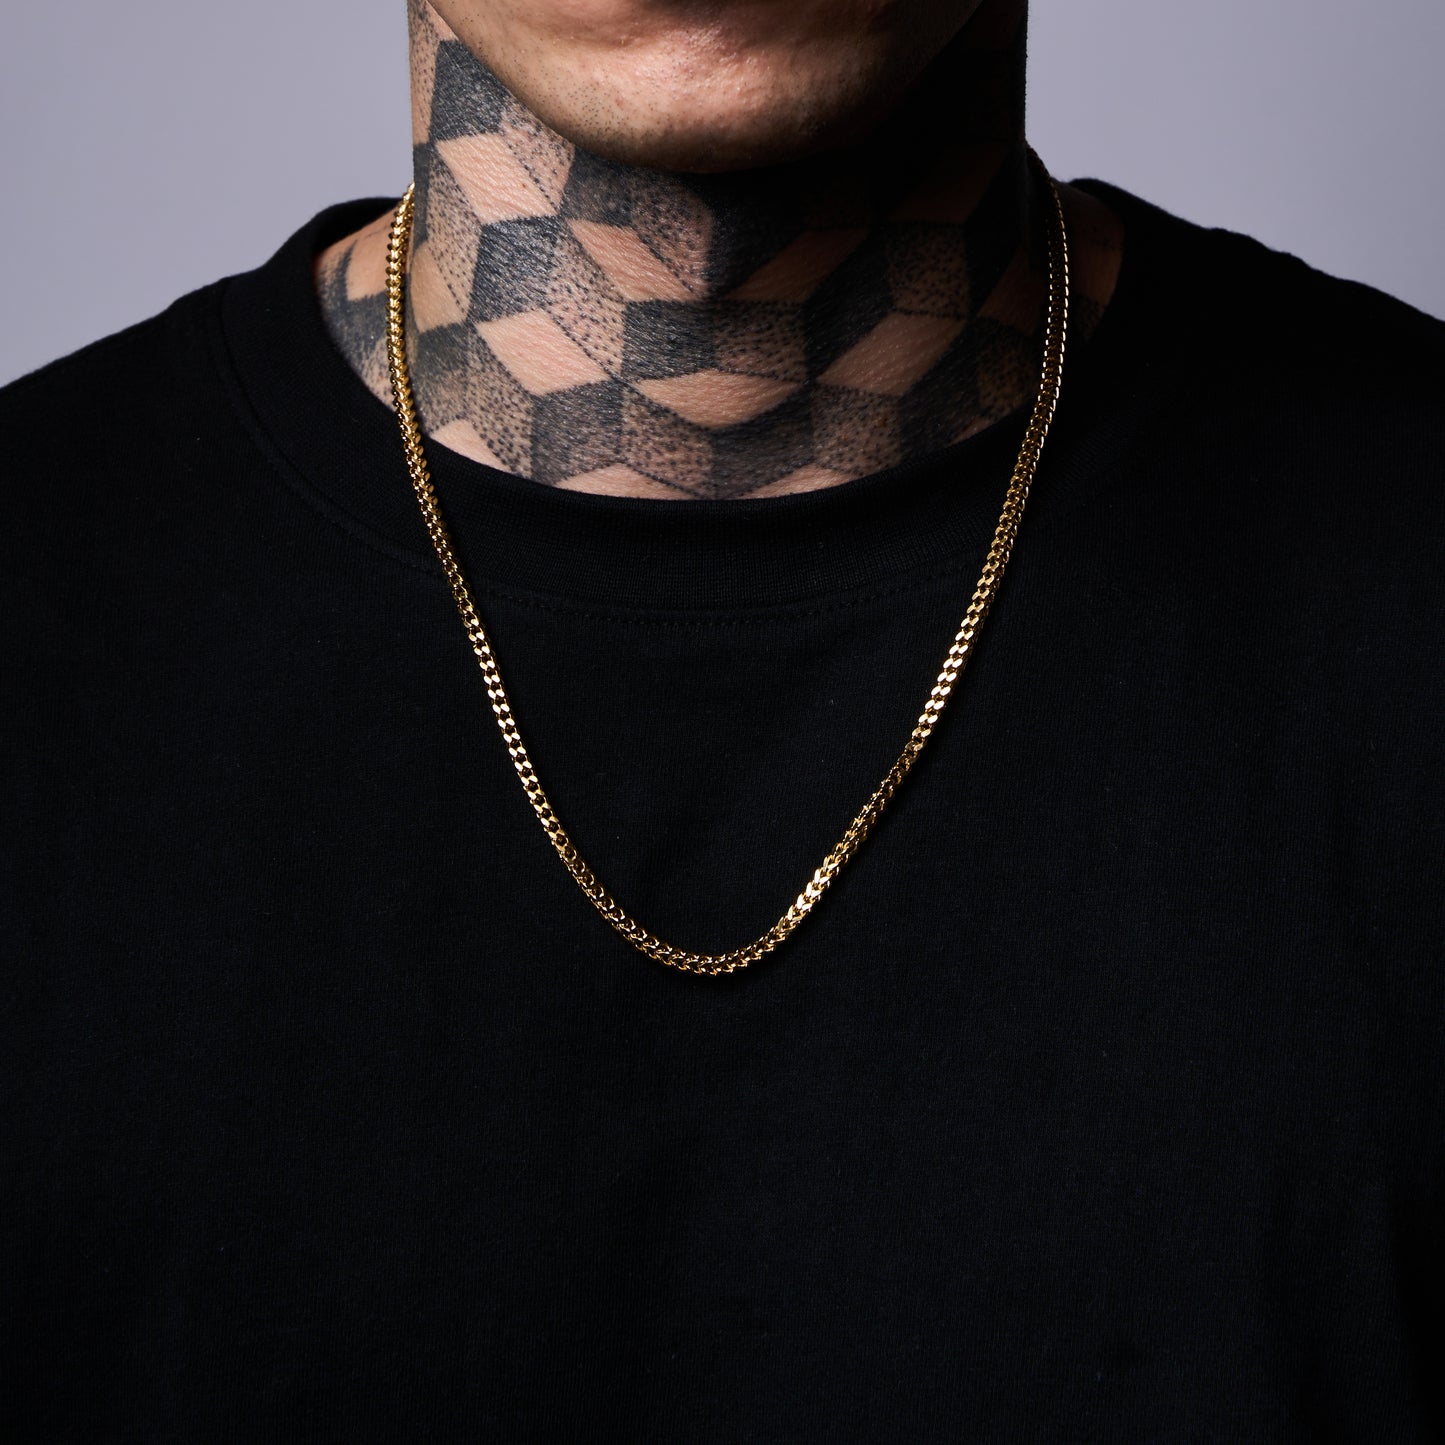 Franco Chain in Yellow Gold - 3mm